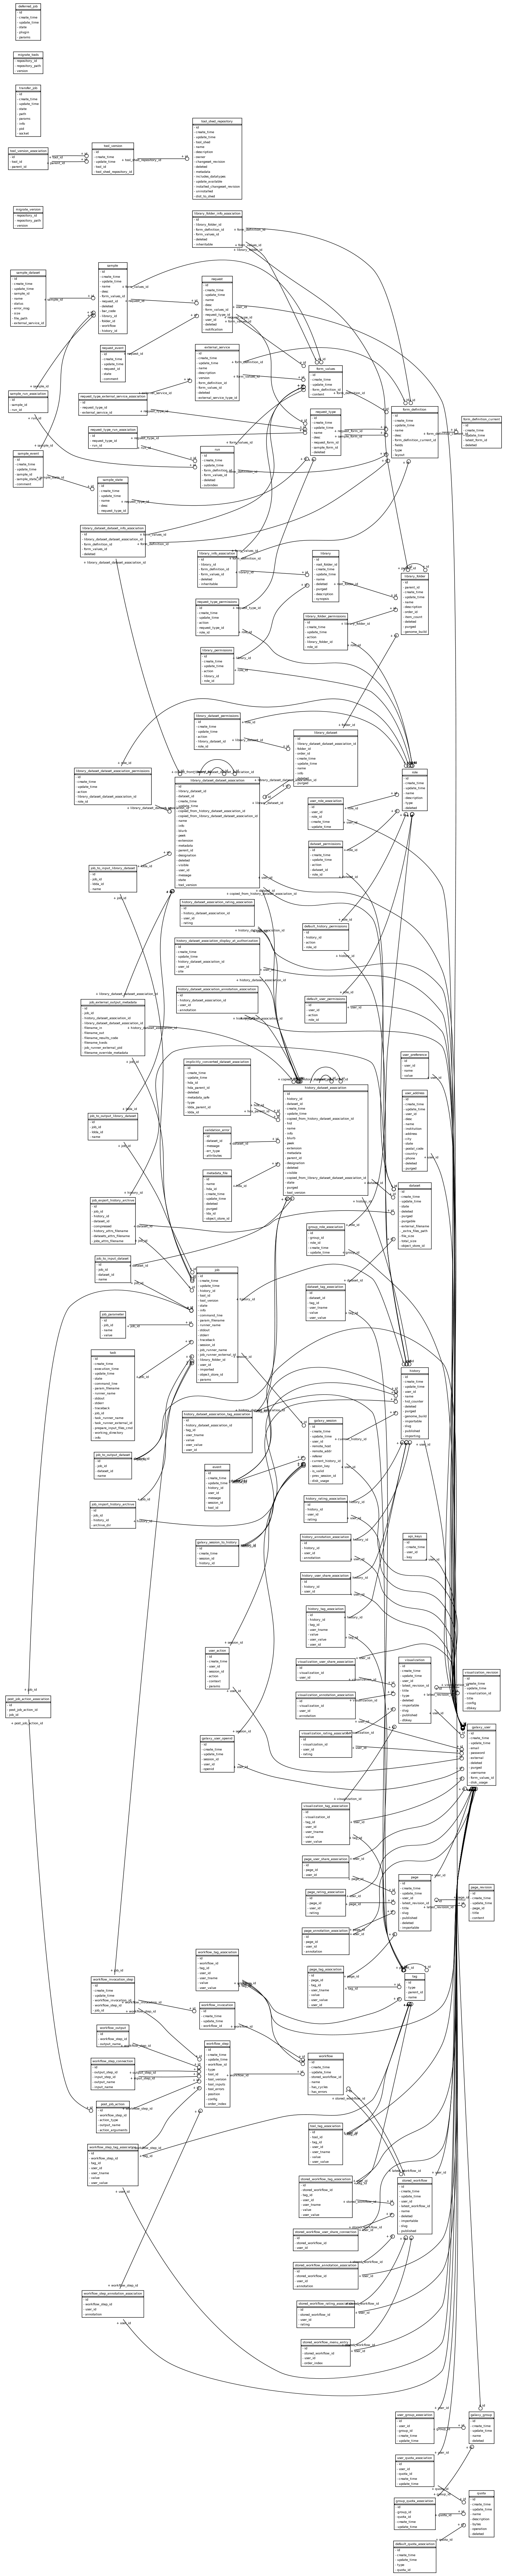 Galaxy Data Model (click to enlarge)